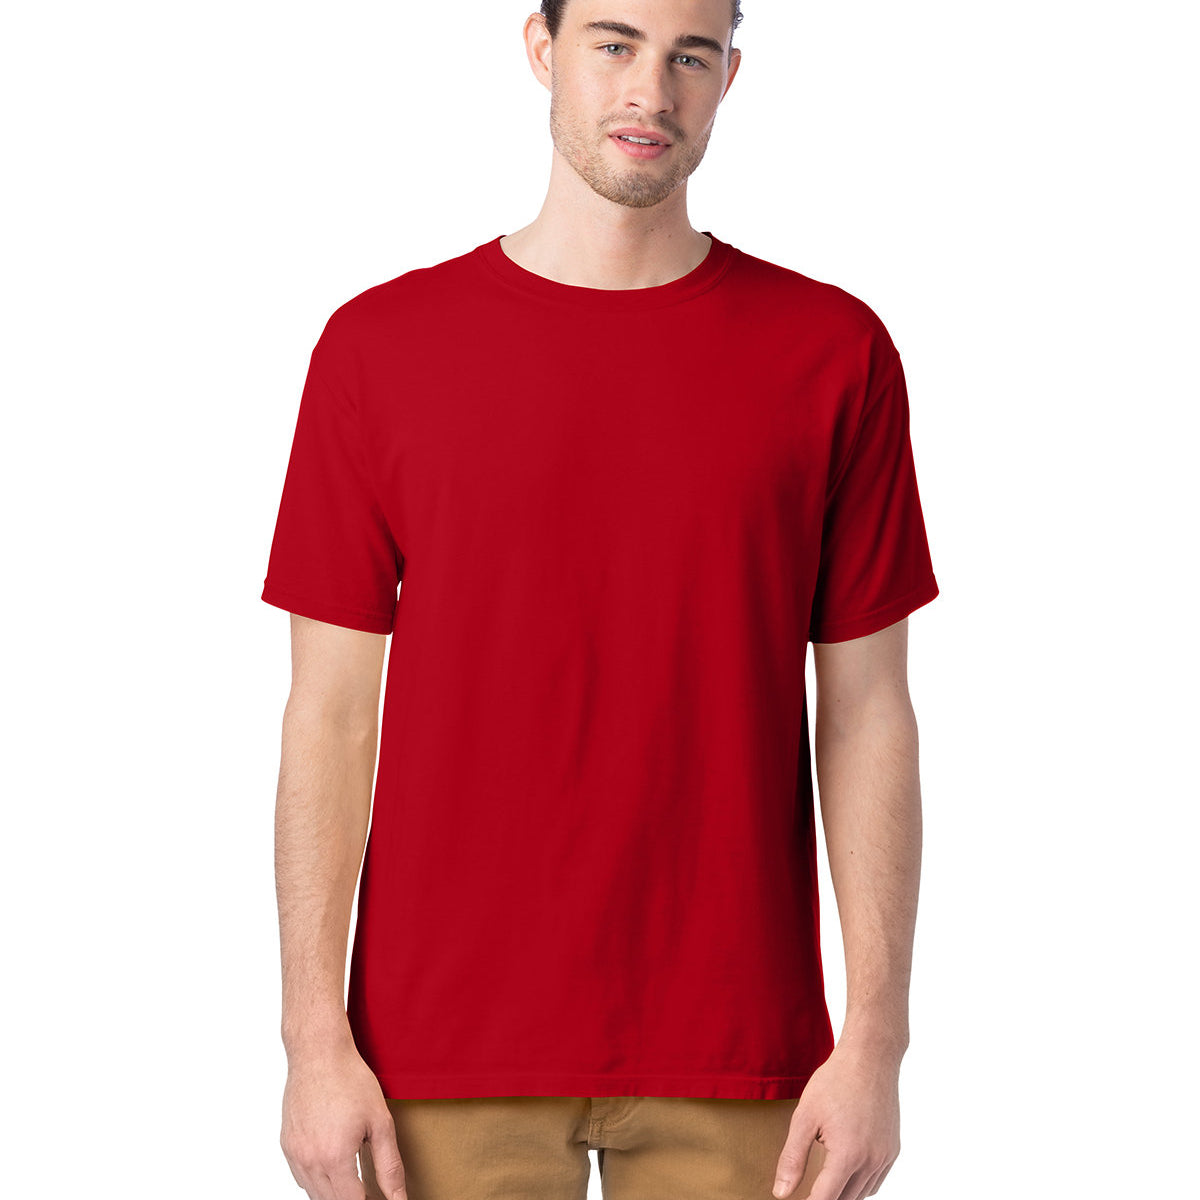 GDH100-CWH-DH-ATHLETICRED-S